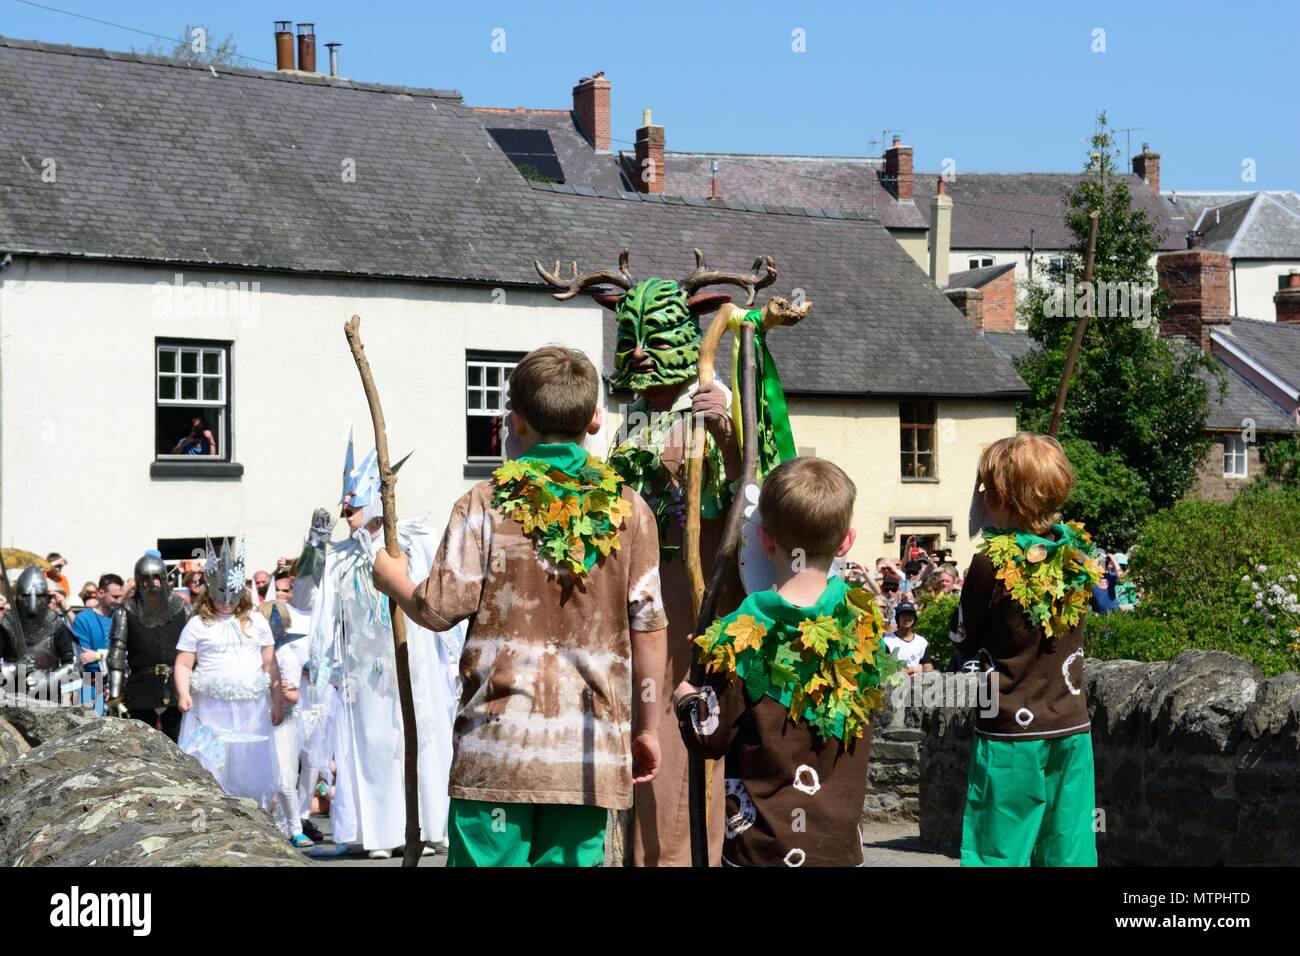 Victory for the Green Man of Clun over the Ice Queen in a battle to banish winter and restore summer on medieval bridge in May Shropshire England UK Stock Photo